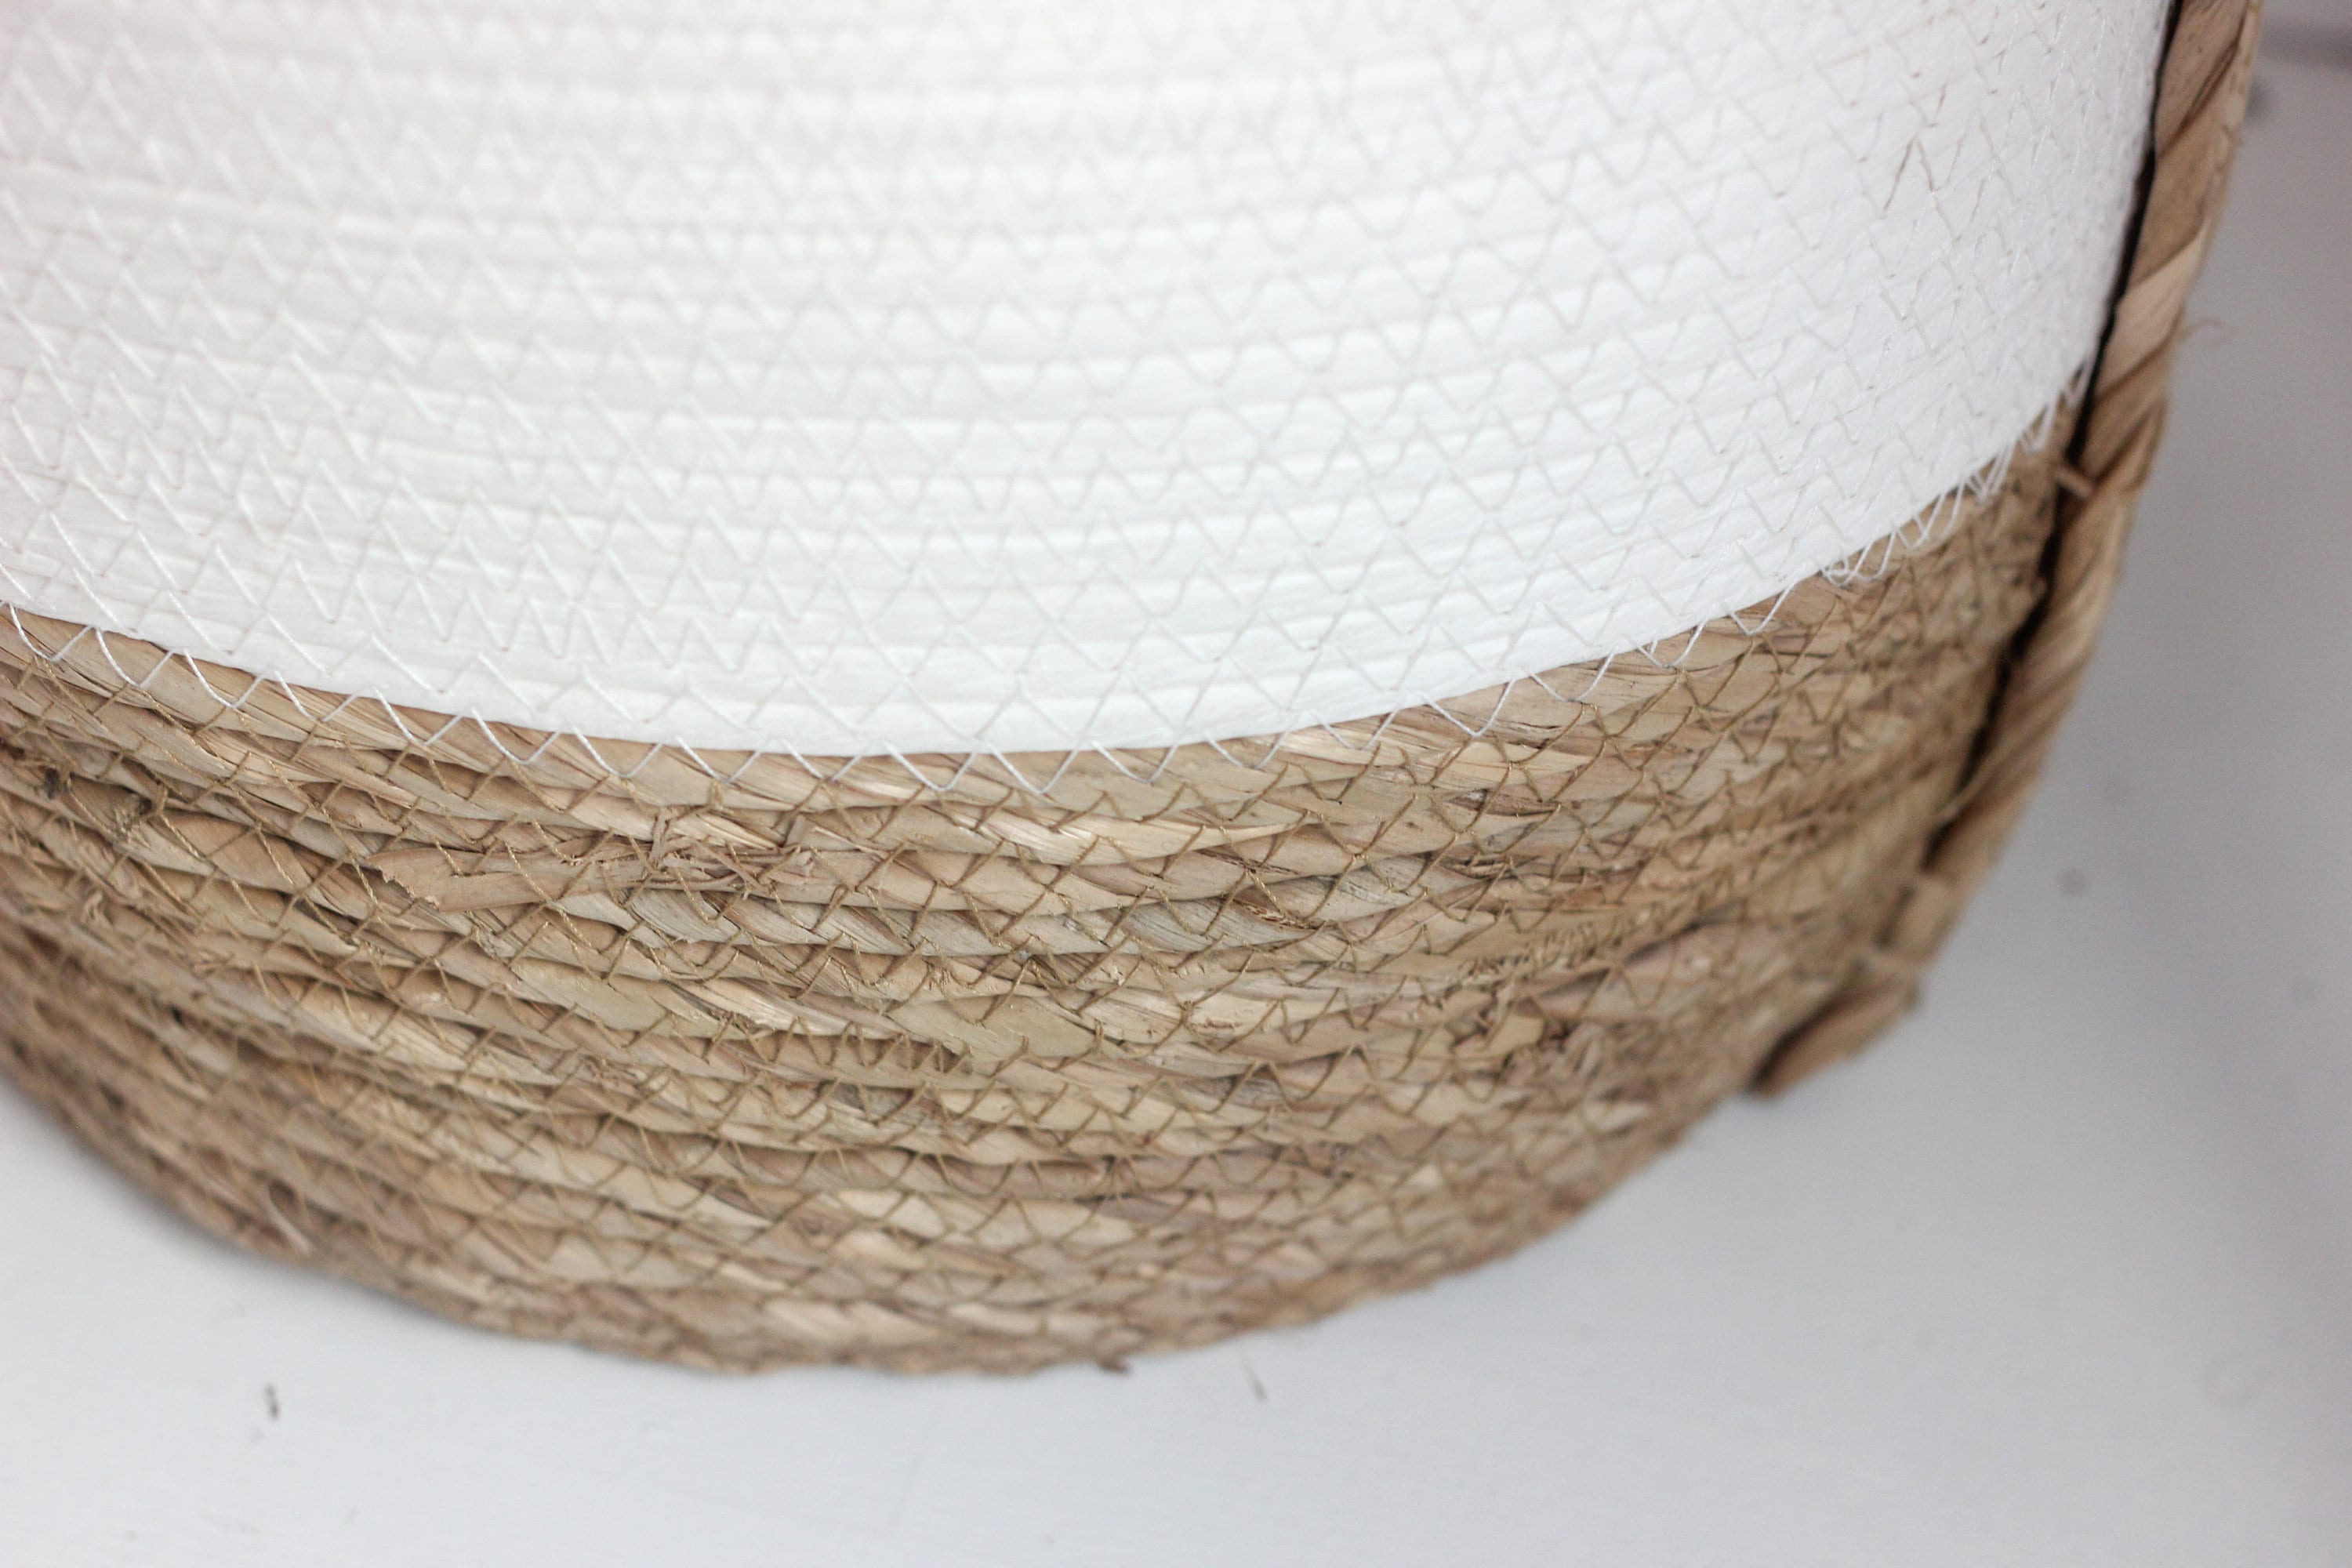 White Cotton and Woven Straw Large Round Basket with Handles